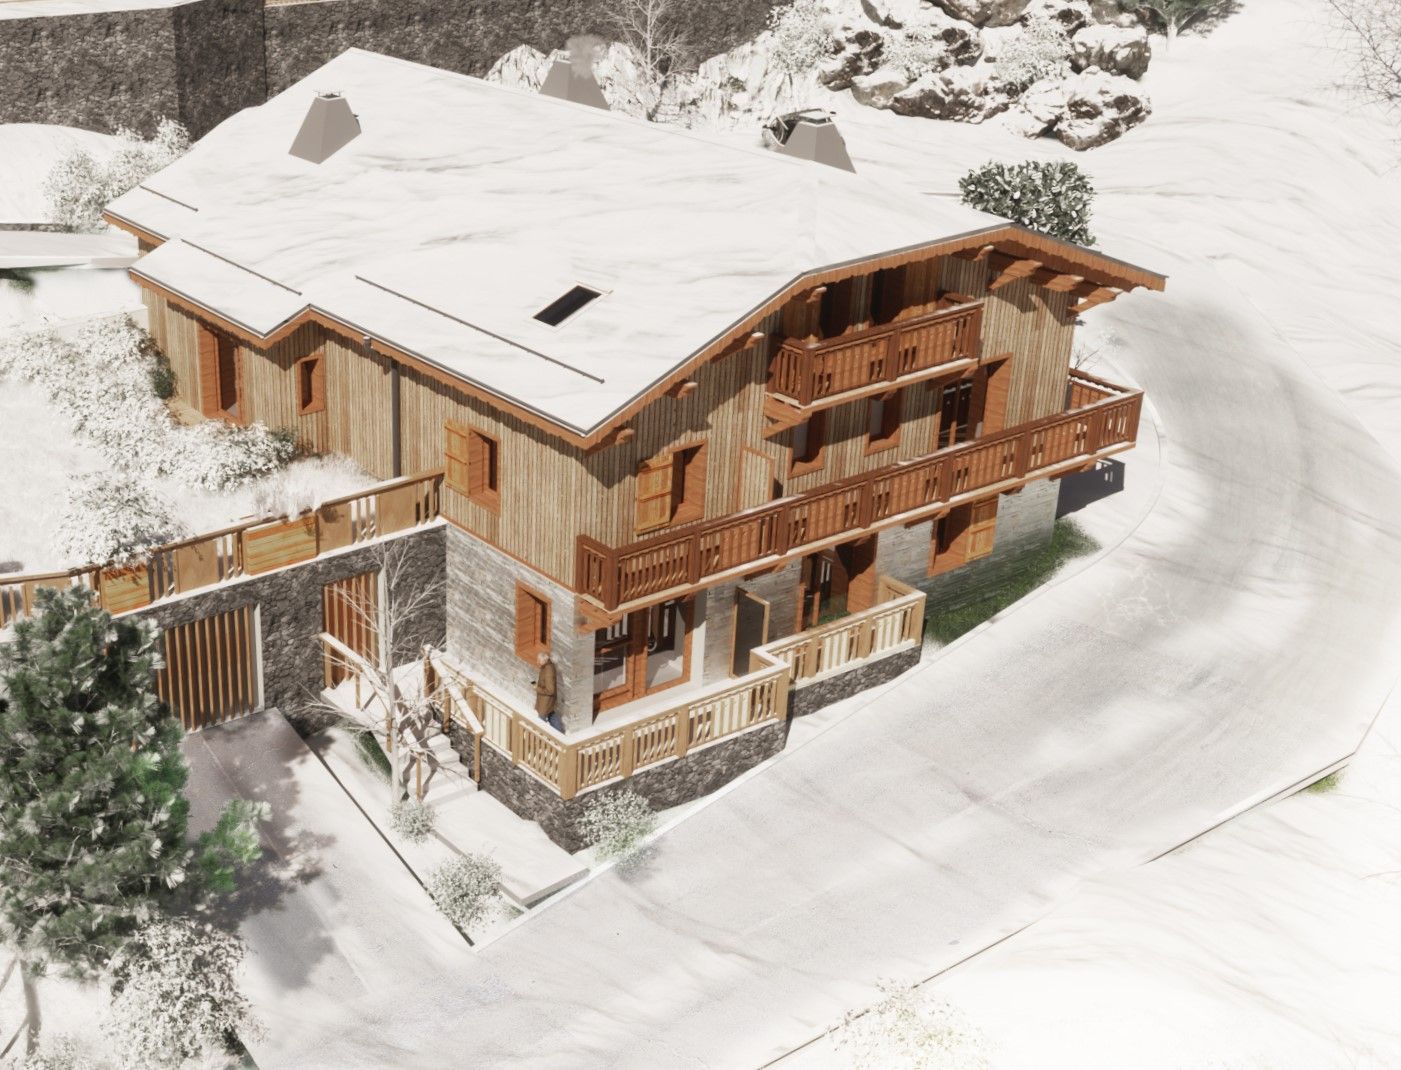 4 bed Apartment For Sale in Grand Massif, French Alps